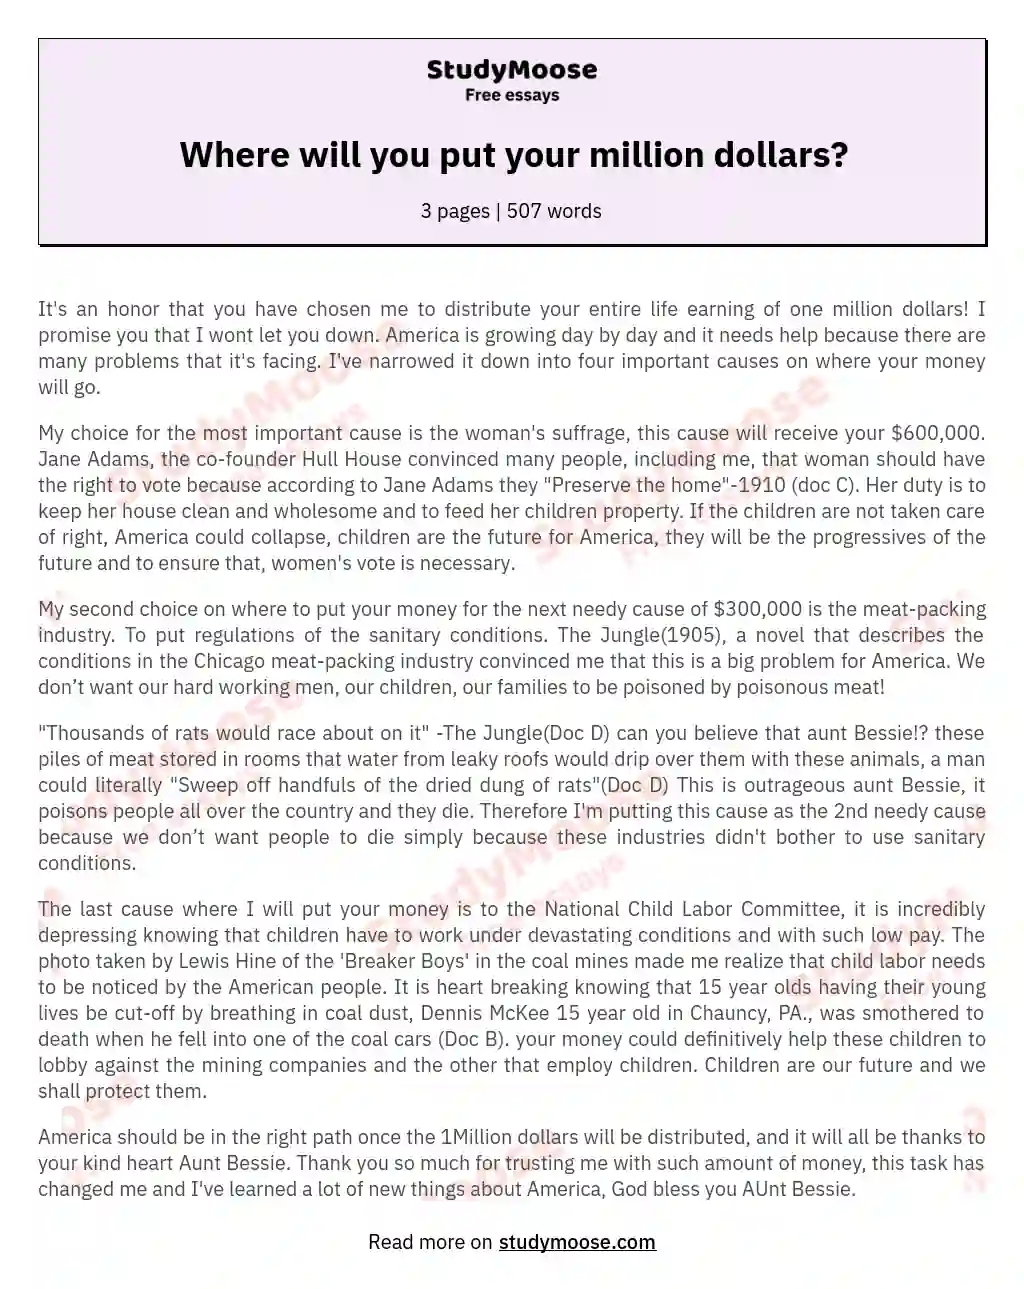 Where will you put your million dollars? essay